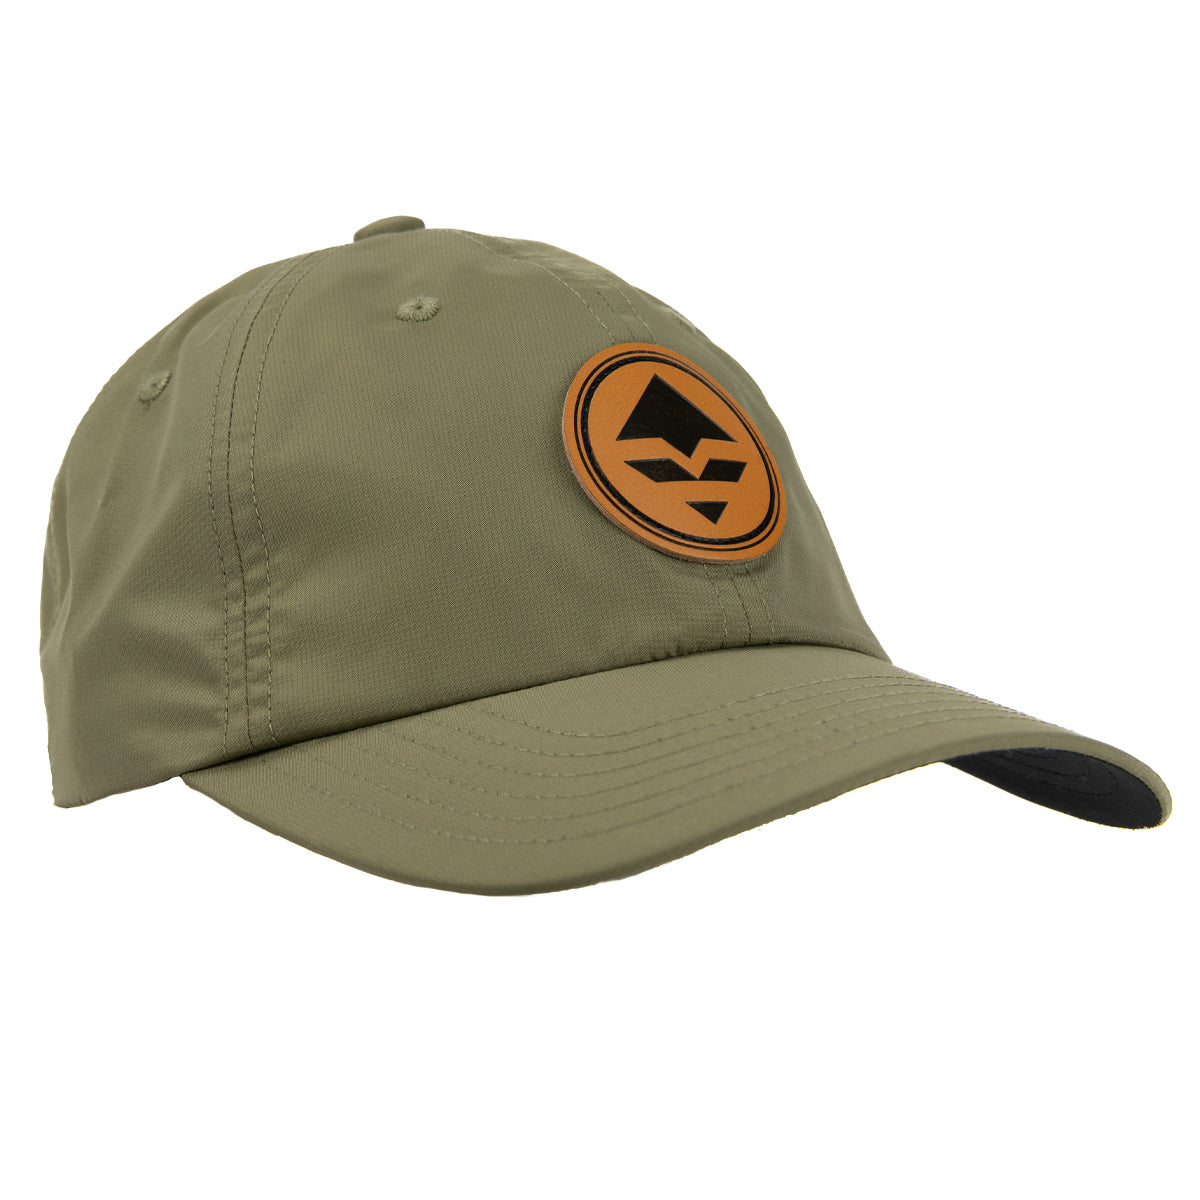 GOHUNT Tanner Hat in Olive by GOHUNT | GOHUNT - GOHUNT Shop